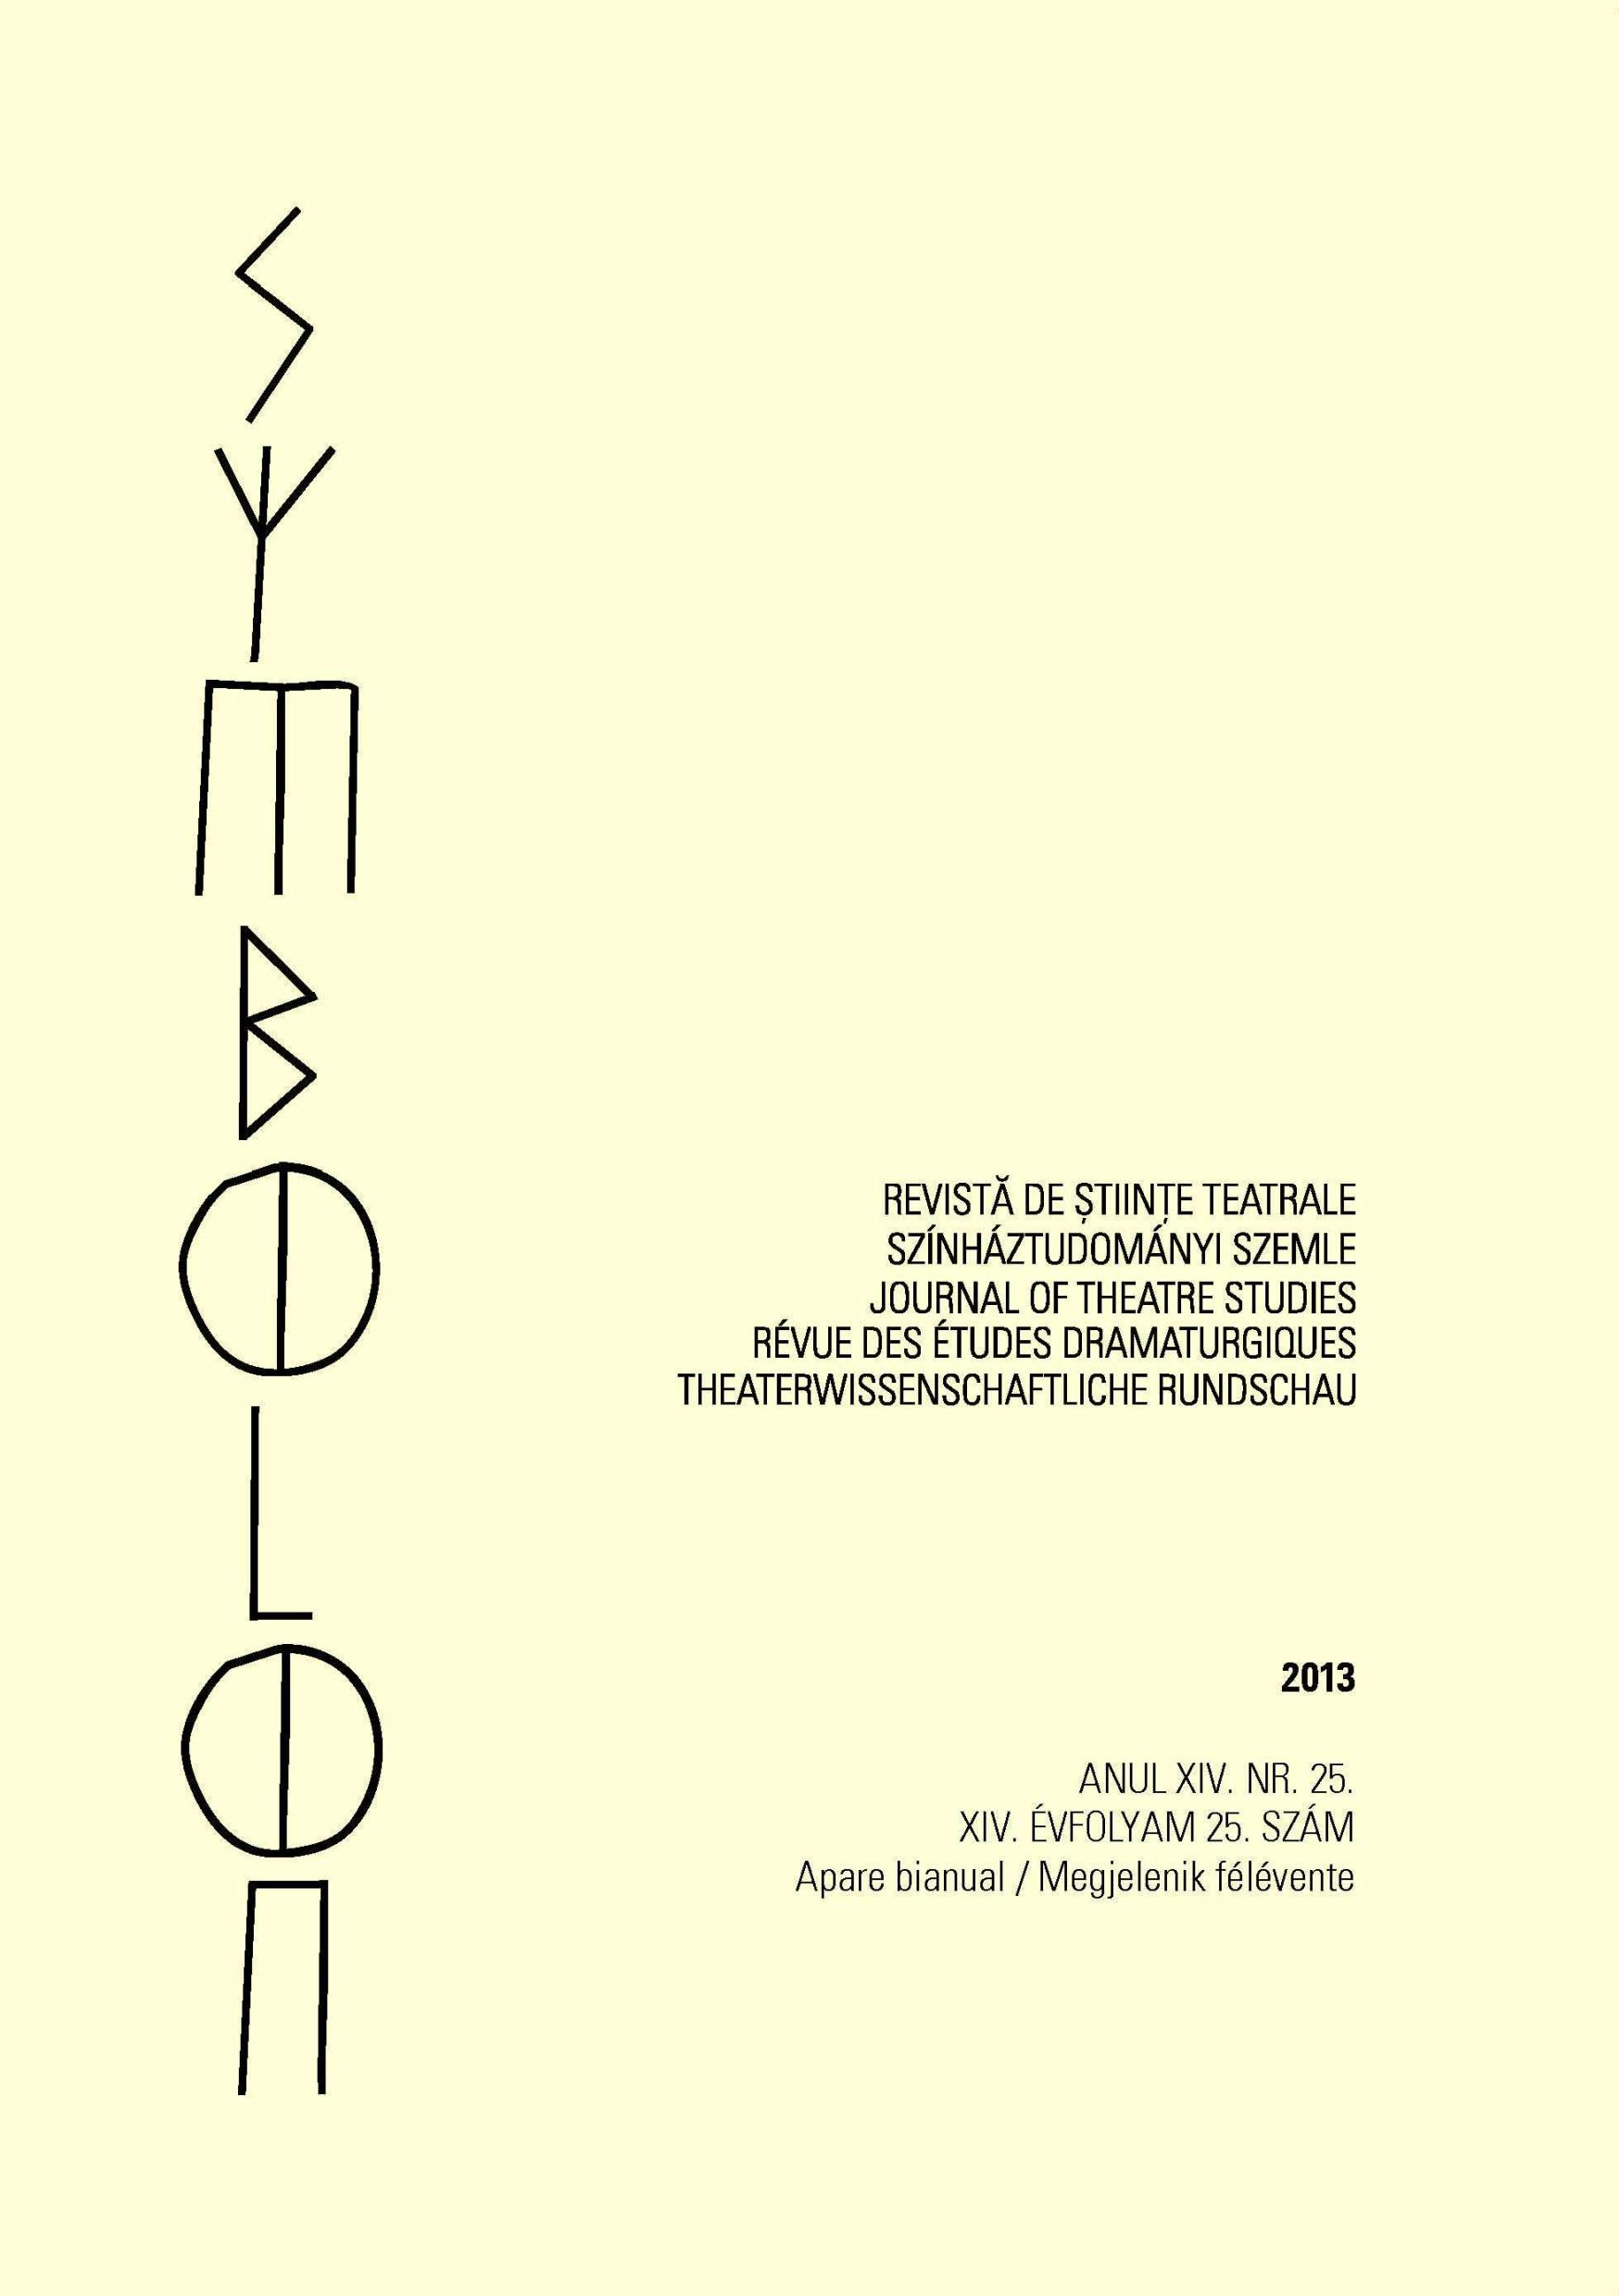 The Utopian Projects in Tadeusz Kantor’s Theatre : “Wielopole, Wielopole” and “Today Is My Birthday” (A Draft of the Research) Cover Image